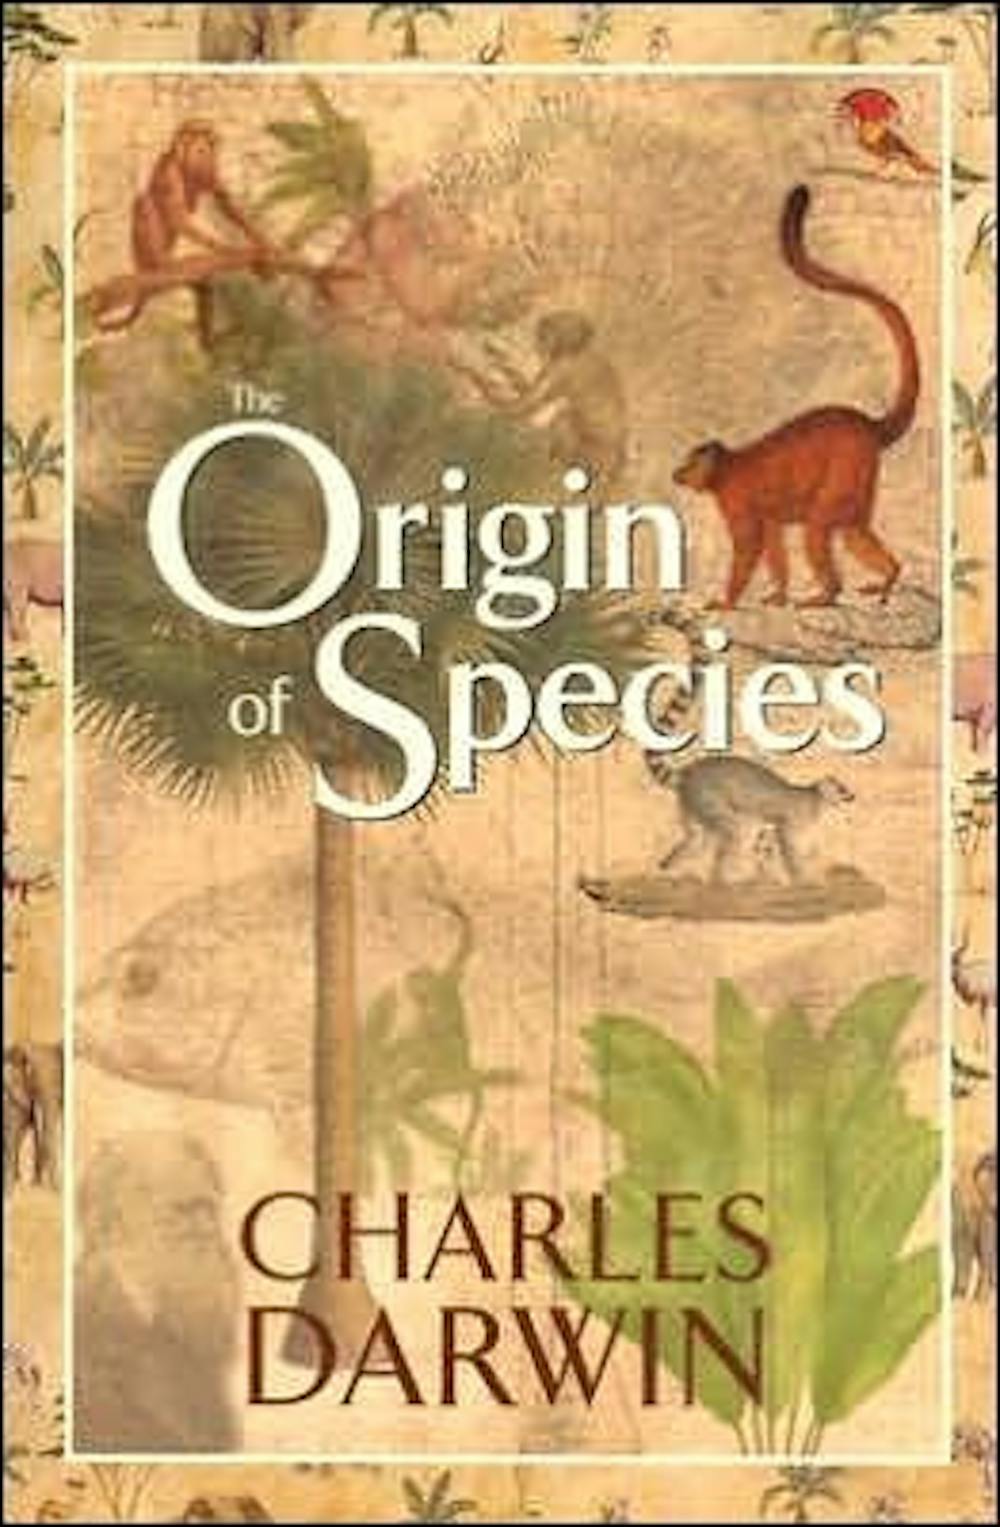 Image result for darwin's theory of evolution the origin of species